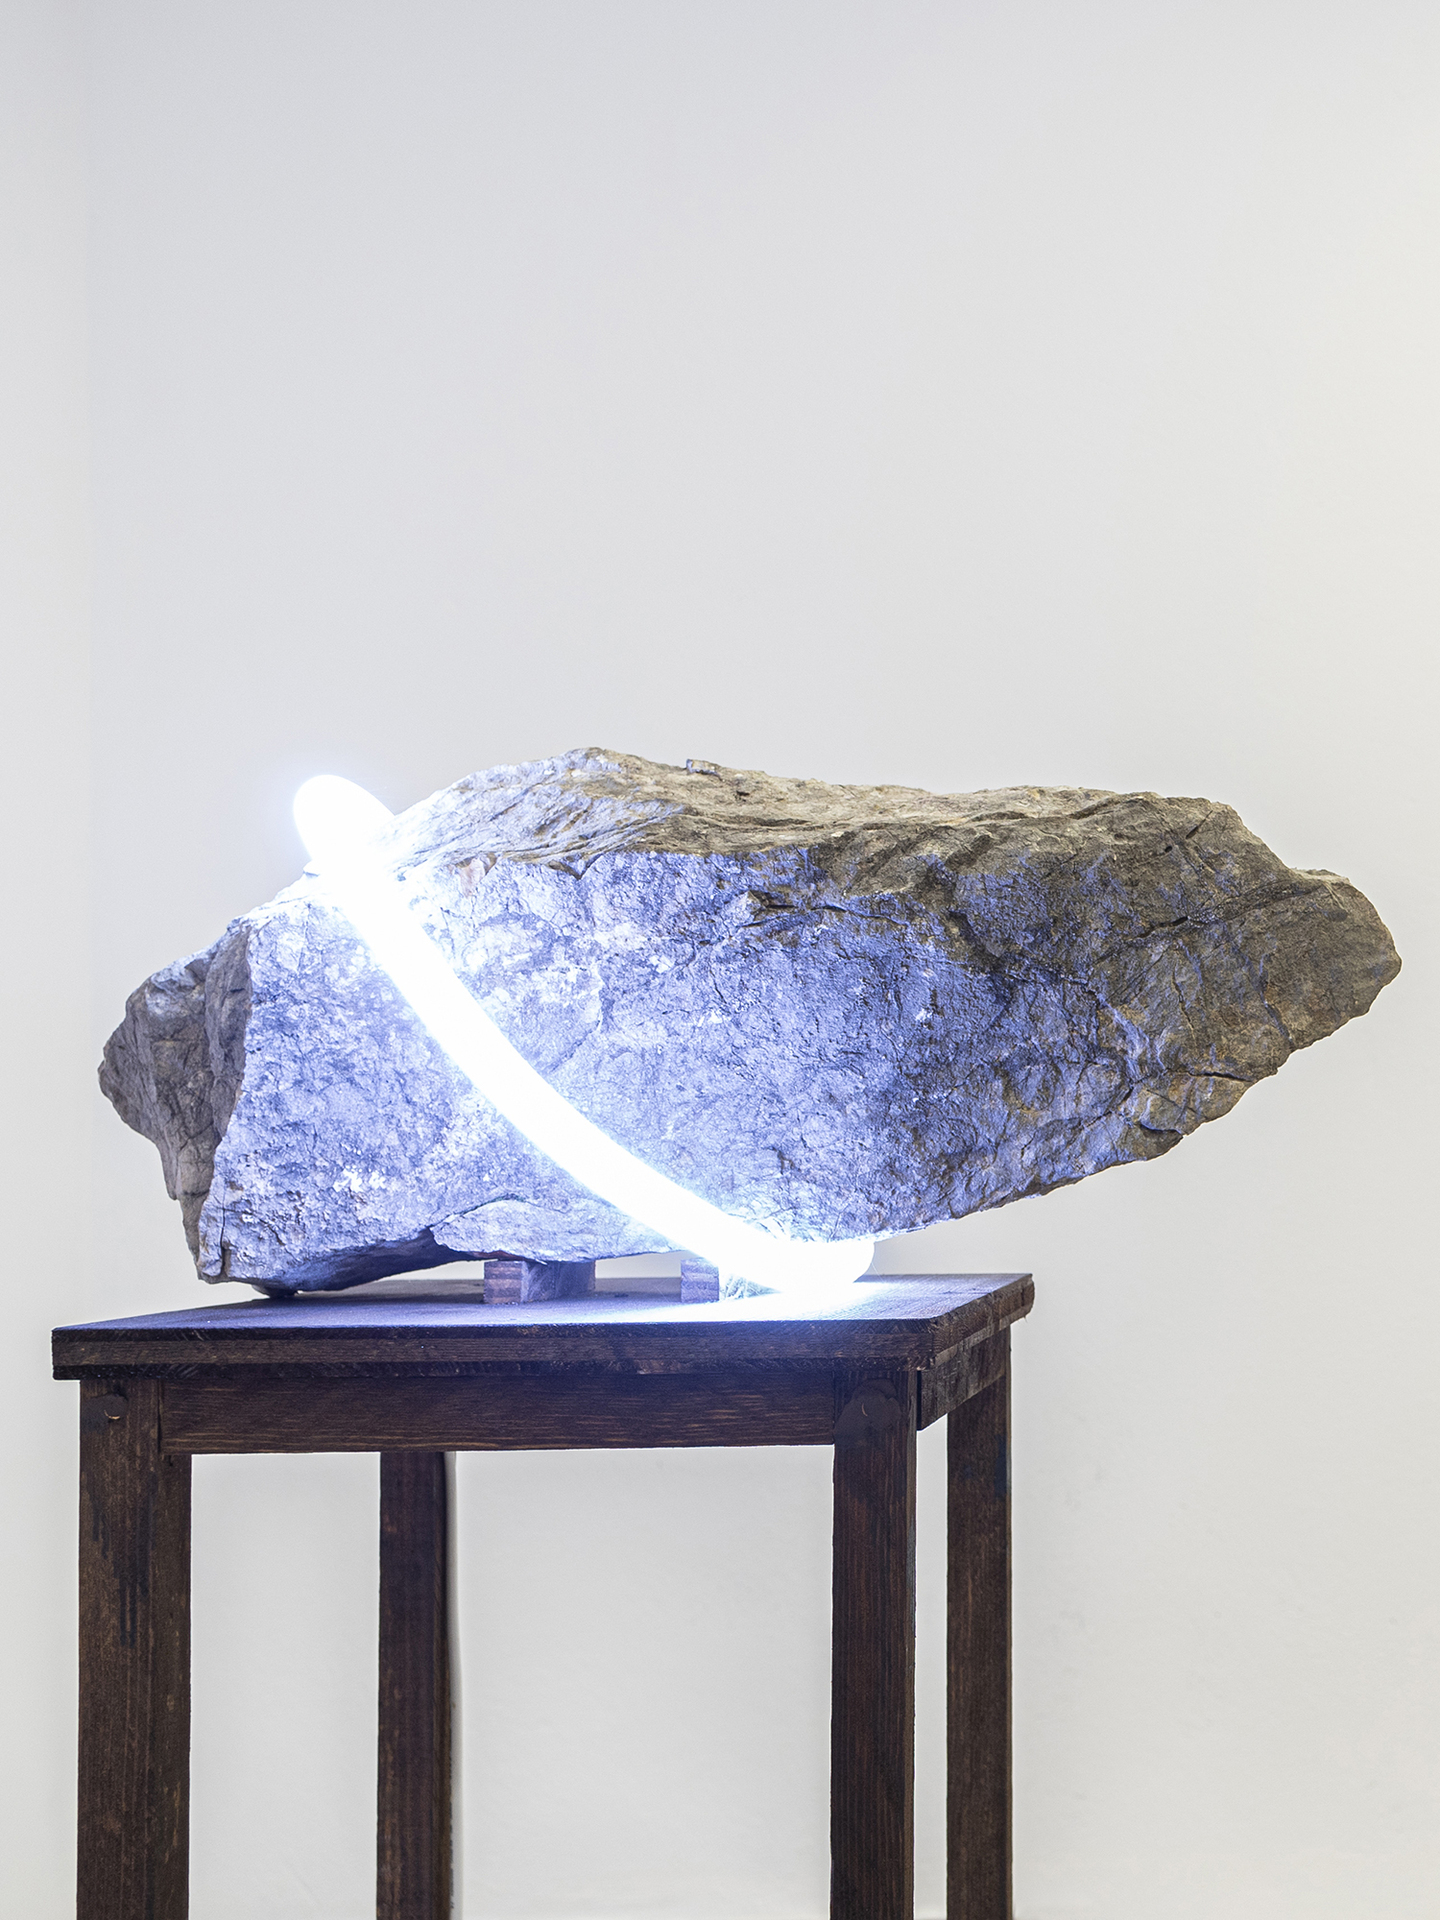 Léo Fourdrinier, Collision (In Solitude Of Memory), 2020, limestone, led, wood, jack socket, variable dimensions